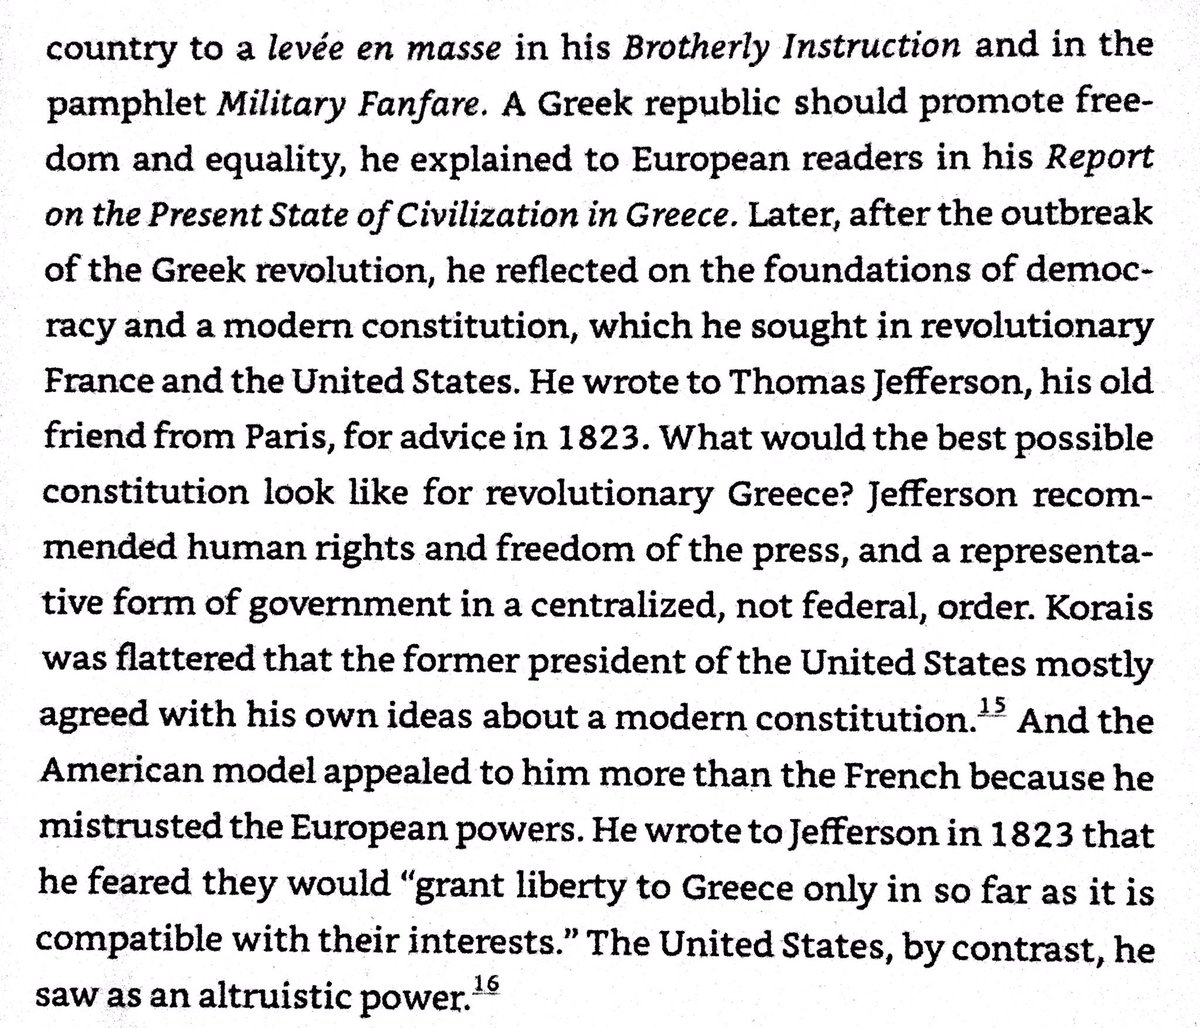 French & American revolutions influenced Balkans. Some Greeks supported Napoleon for his liberal ideas, & hoped to create a multinational republic in Balkans & western Anatolia. One Greek corresponded with Jefferson, who advised a centralized rather than federal government.